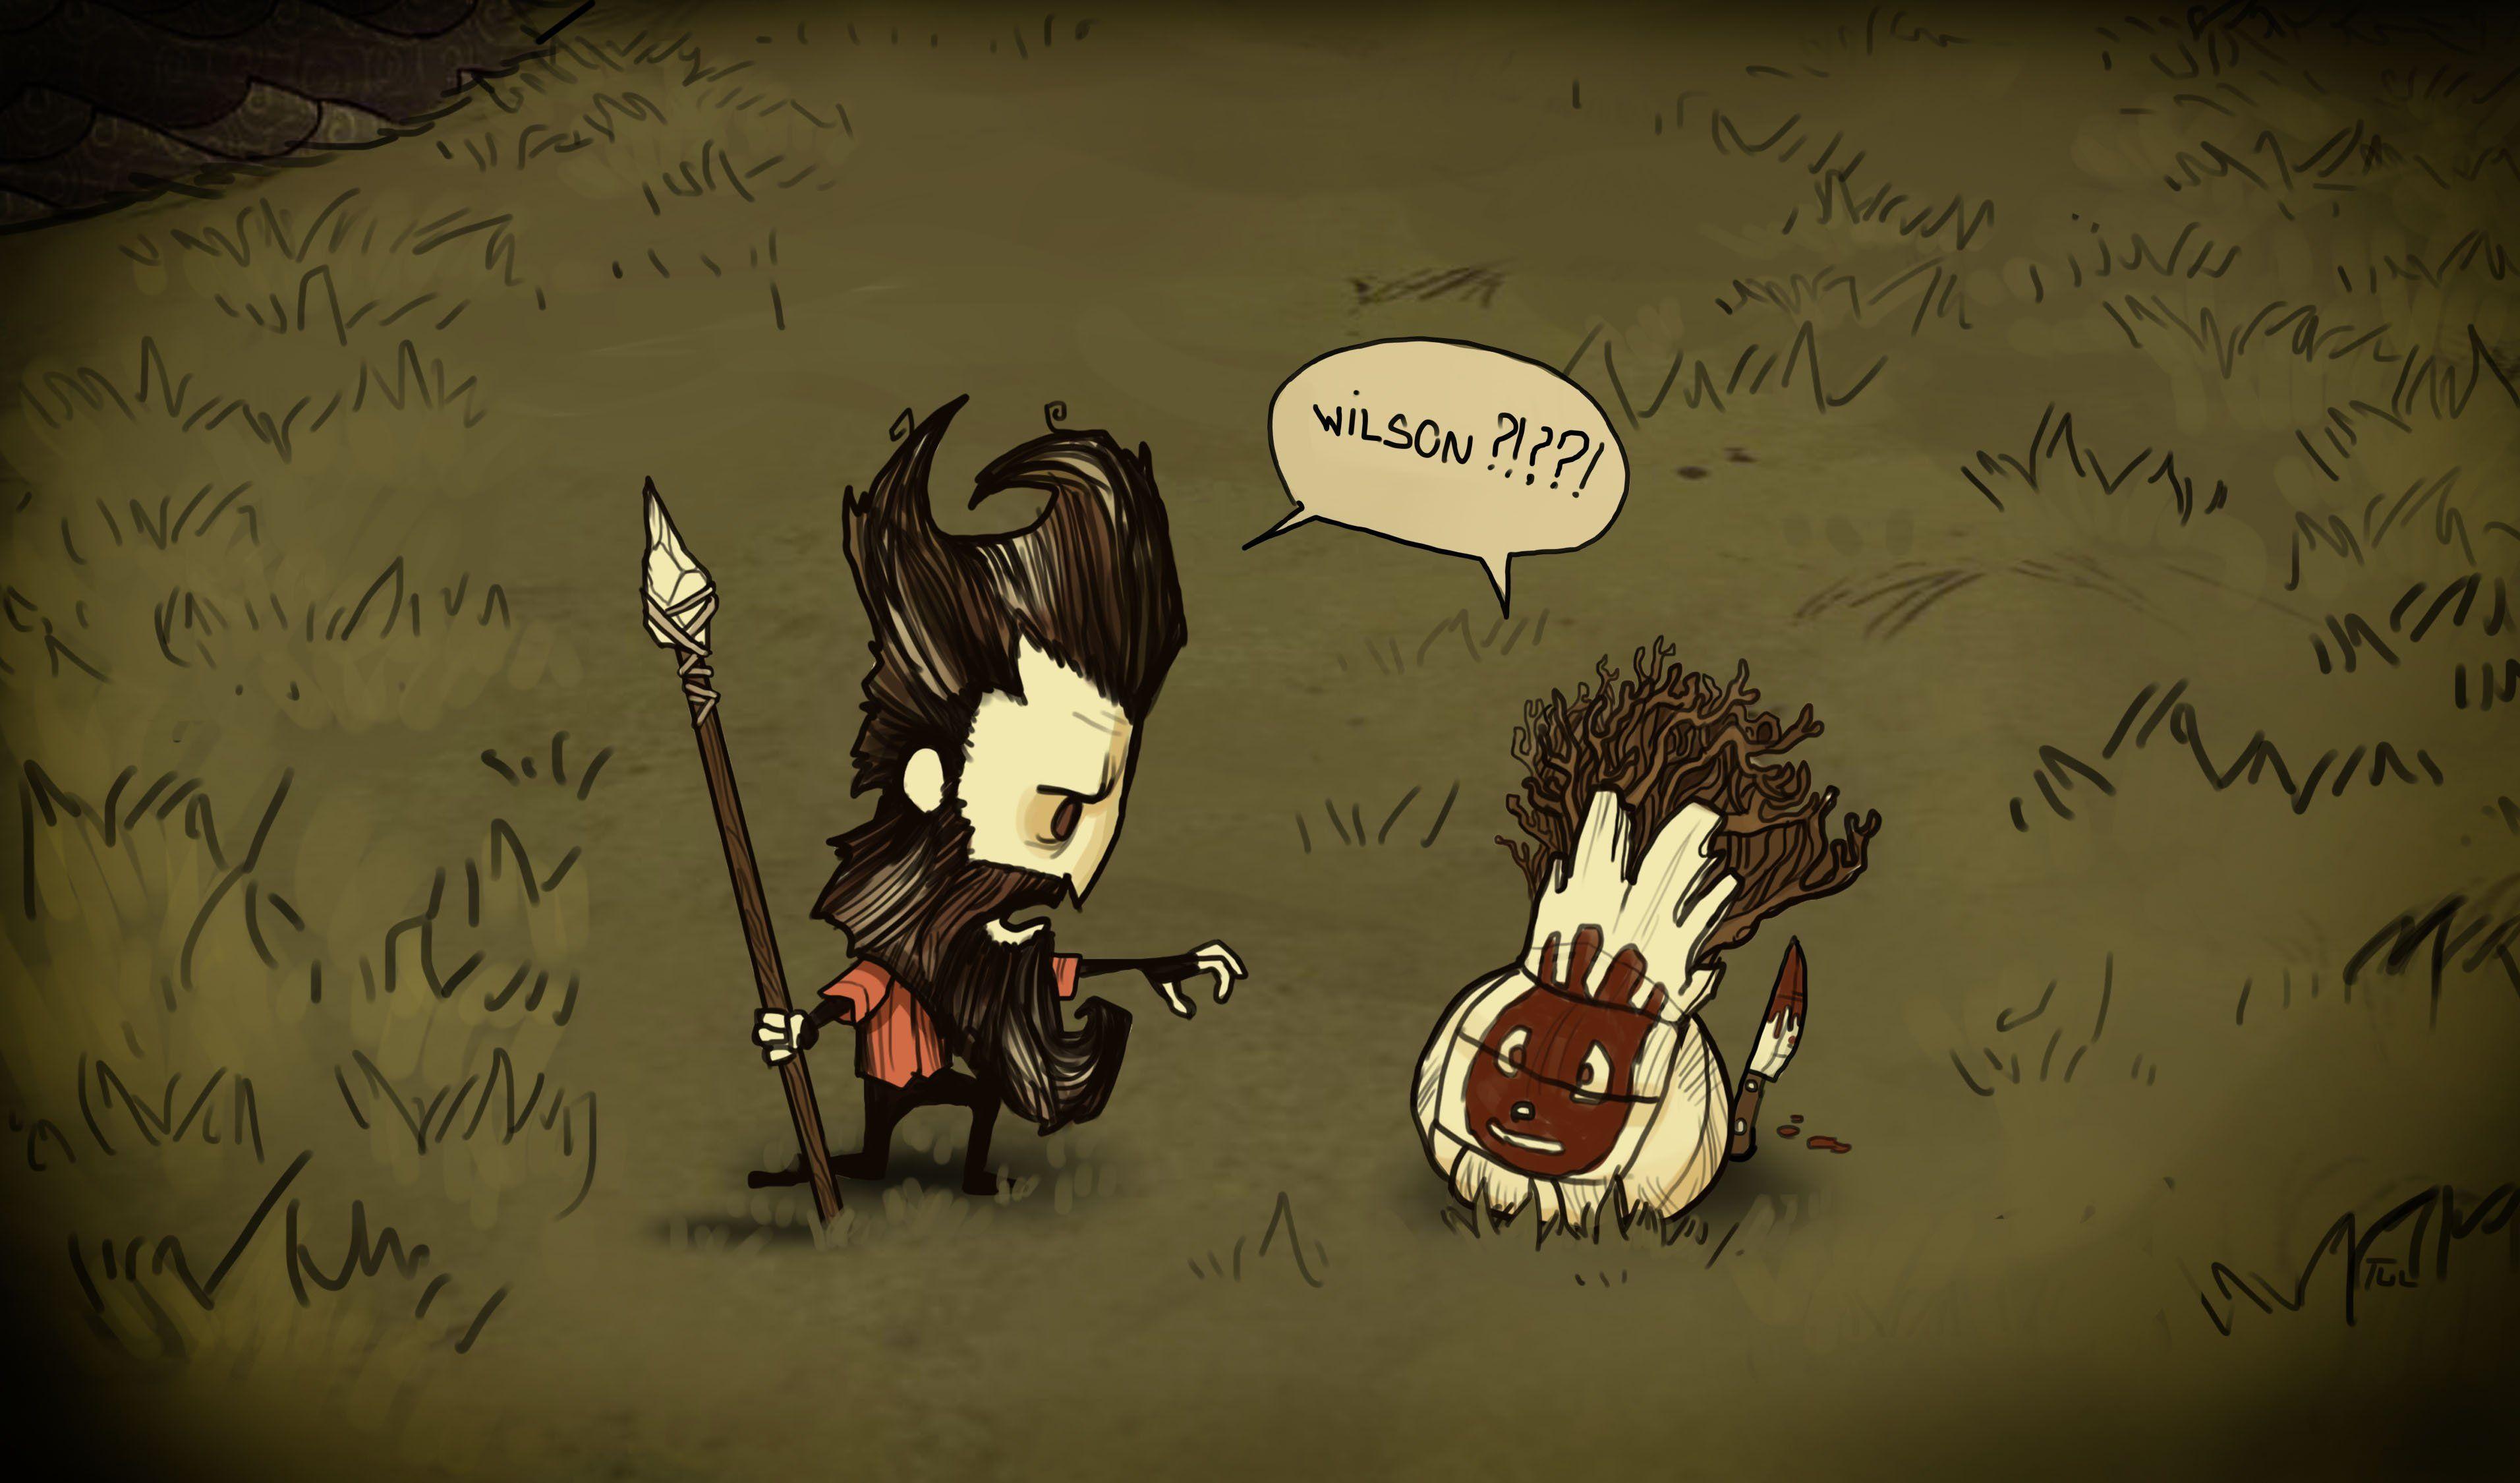 Don t object. Don't Starve together Уилсон. Неголодайка Уилсон. Уилсон don't Starve Art. Don't Starve together Уилсон Art.